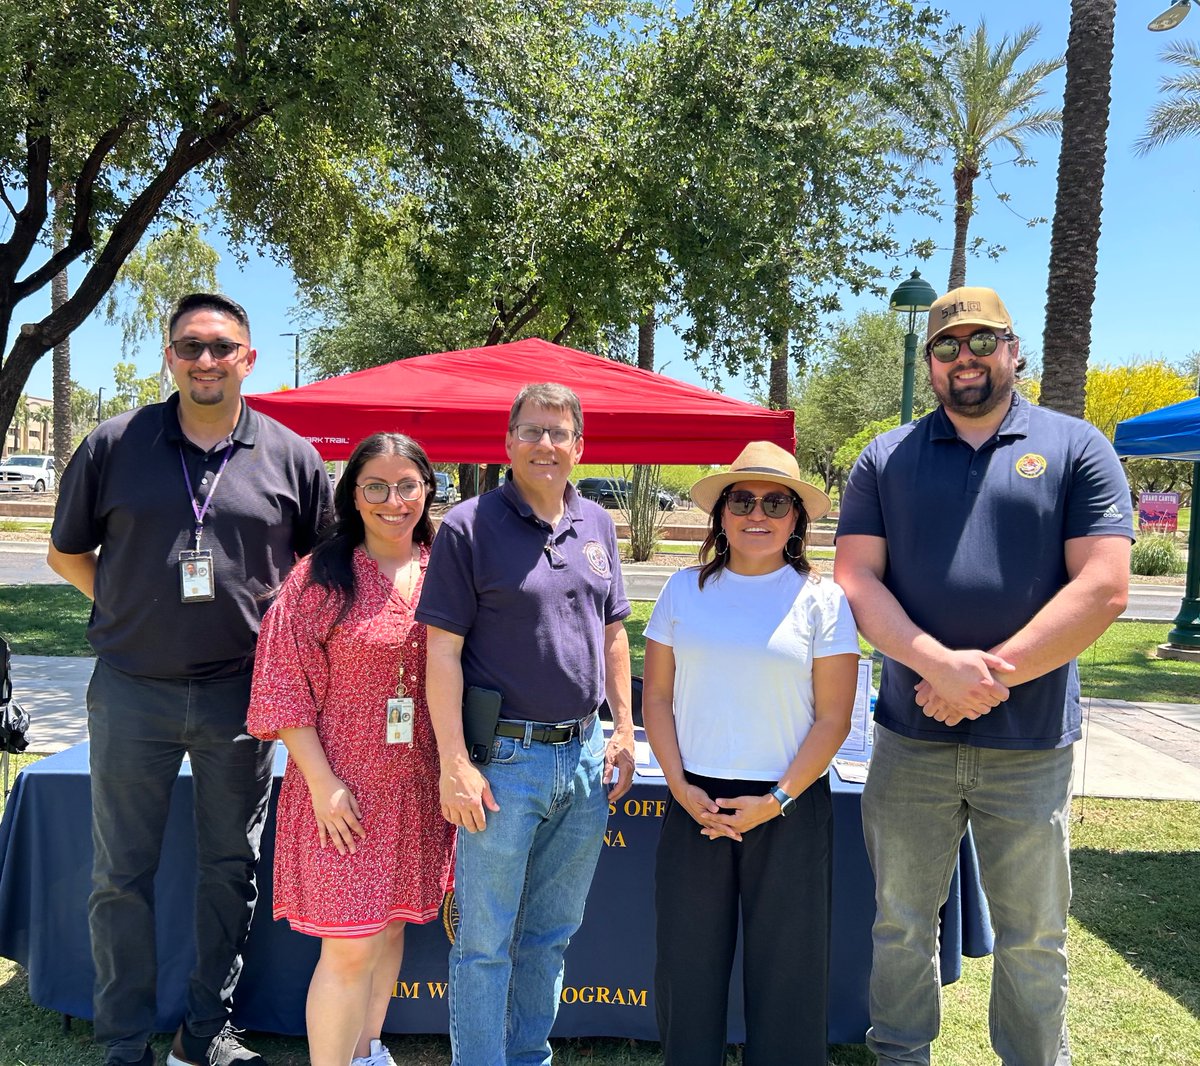 In recognition of National Missing or Murdered Indigenous Persons Awareness Day, and in honor of the resilience of victims, USAO employees from Arizona and New Mexico gathered at the Arizona State Capitol to hear about new best practices and to enhance collaboration.